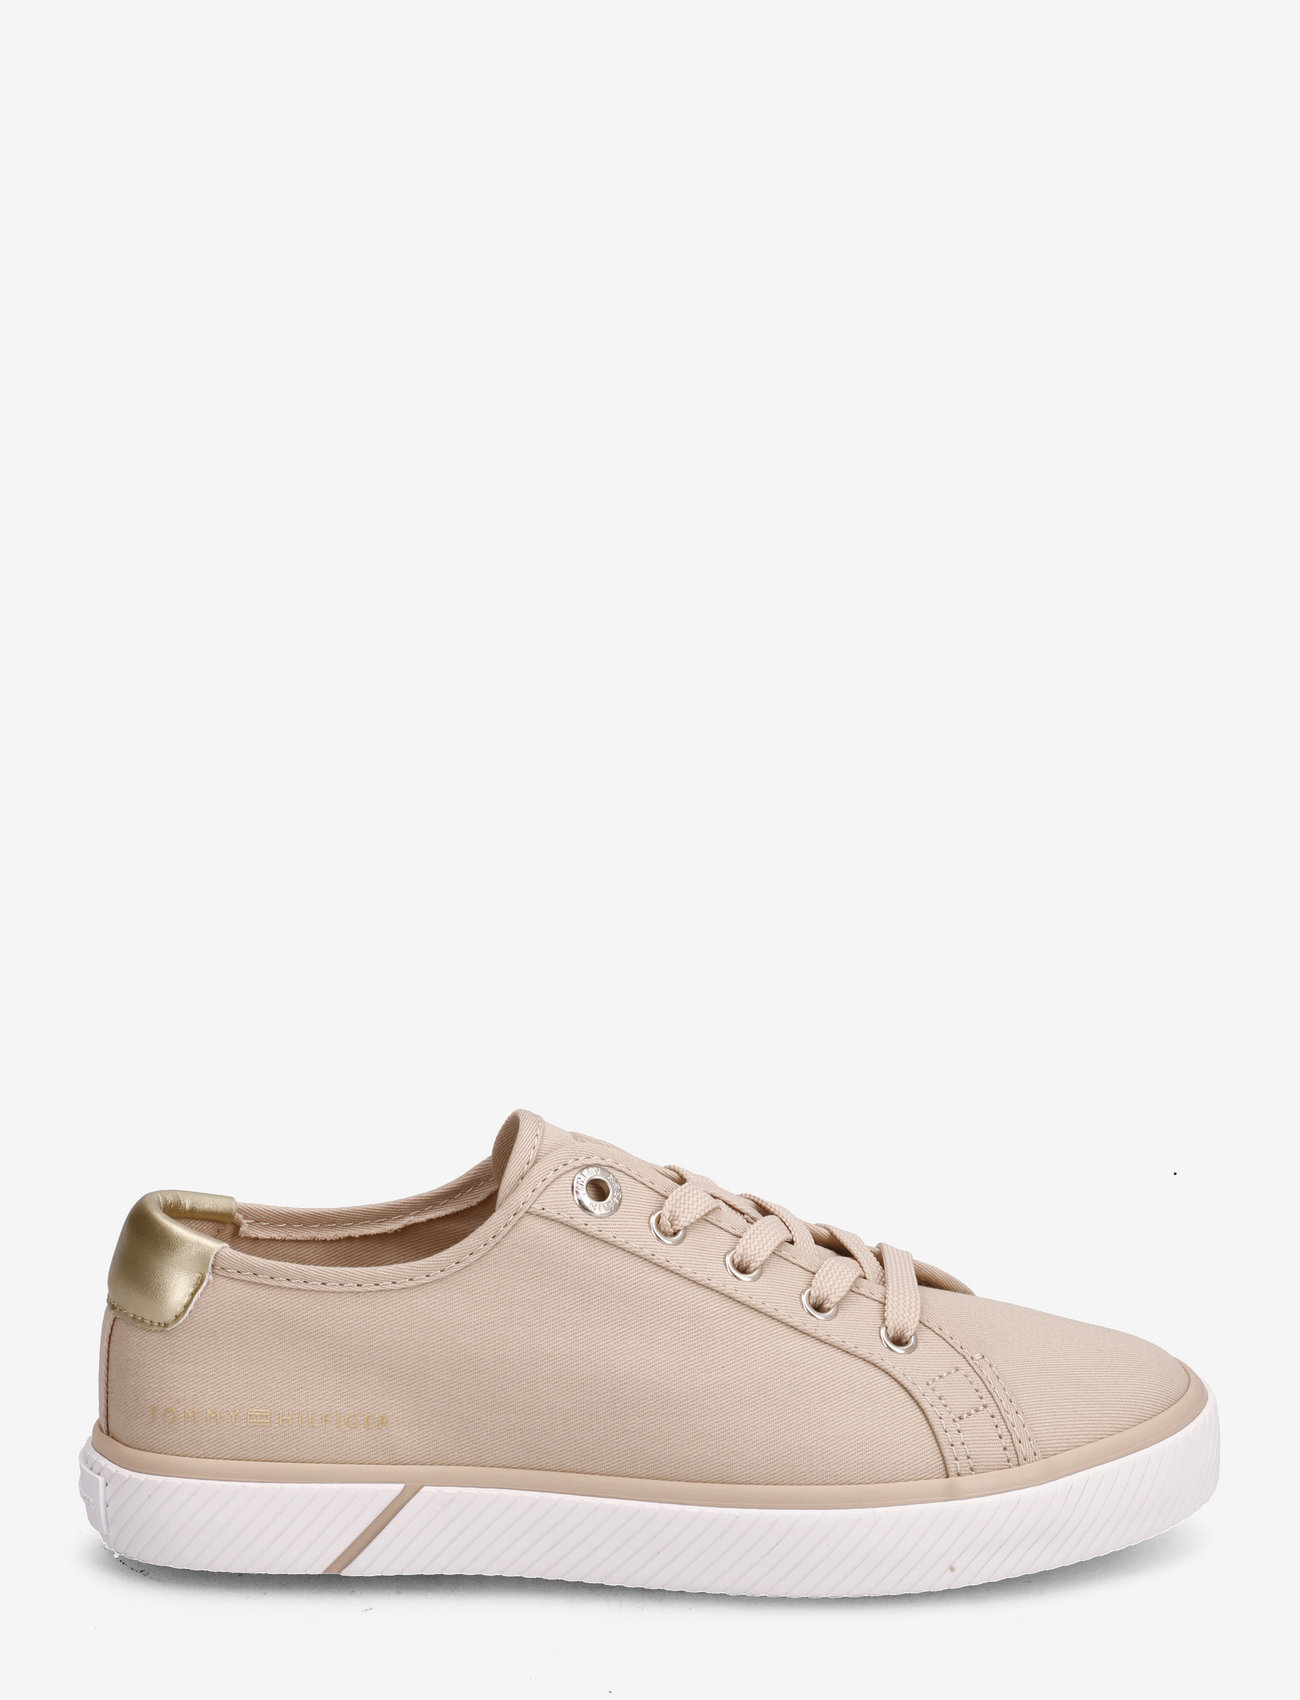 Tommy Hilfiger - LACE UP VULC SNEAKER - sneakers - misty blush - 1